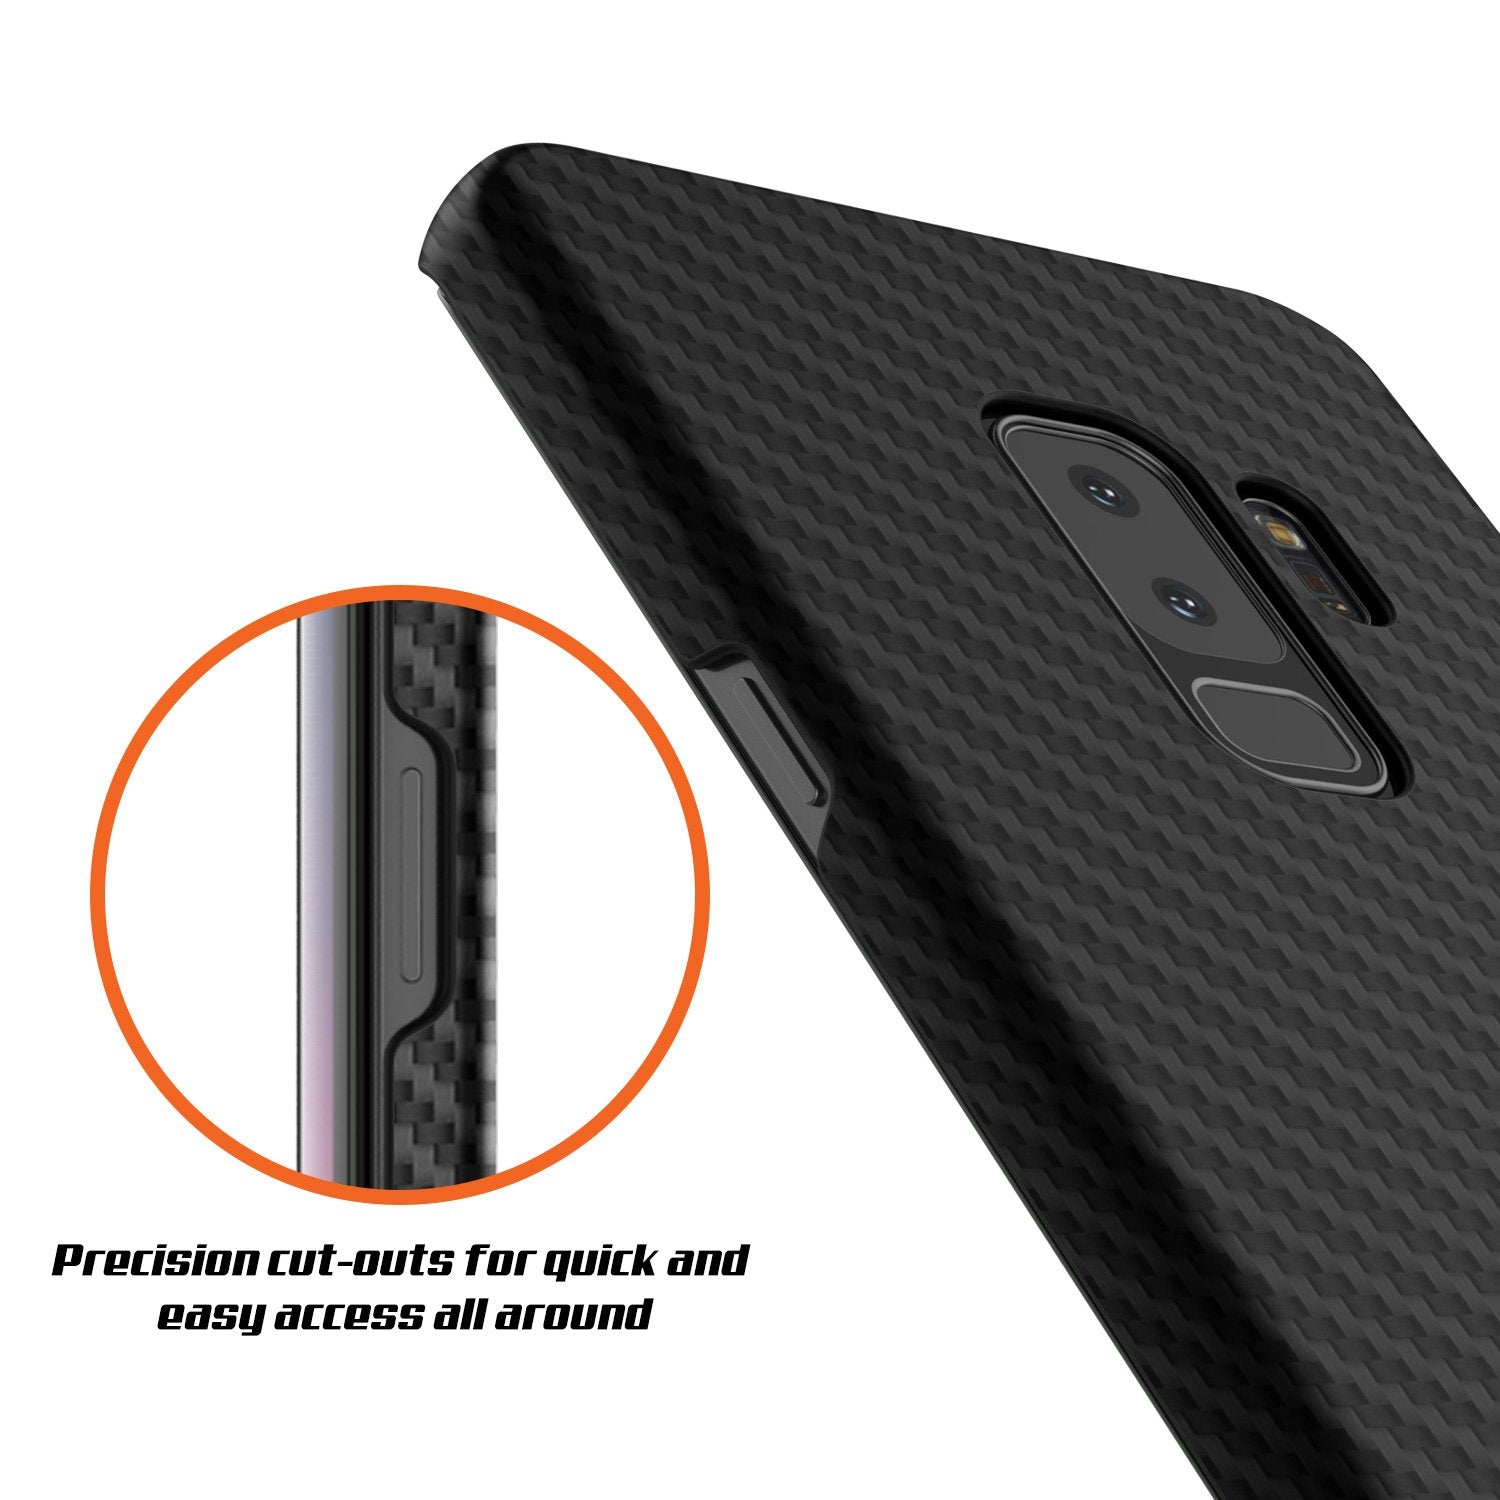 Galaxy S9 Plus Case, Punkcase CarbonShield, Heavy Duty & Ultra Thin 2 Piece Dual Layer PU Leather Jet Black Cover